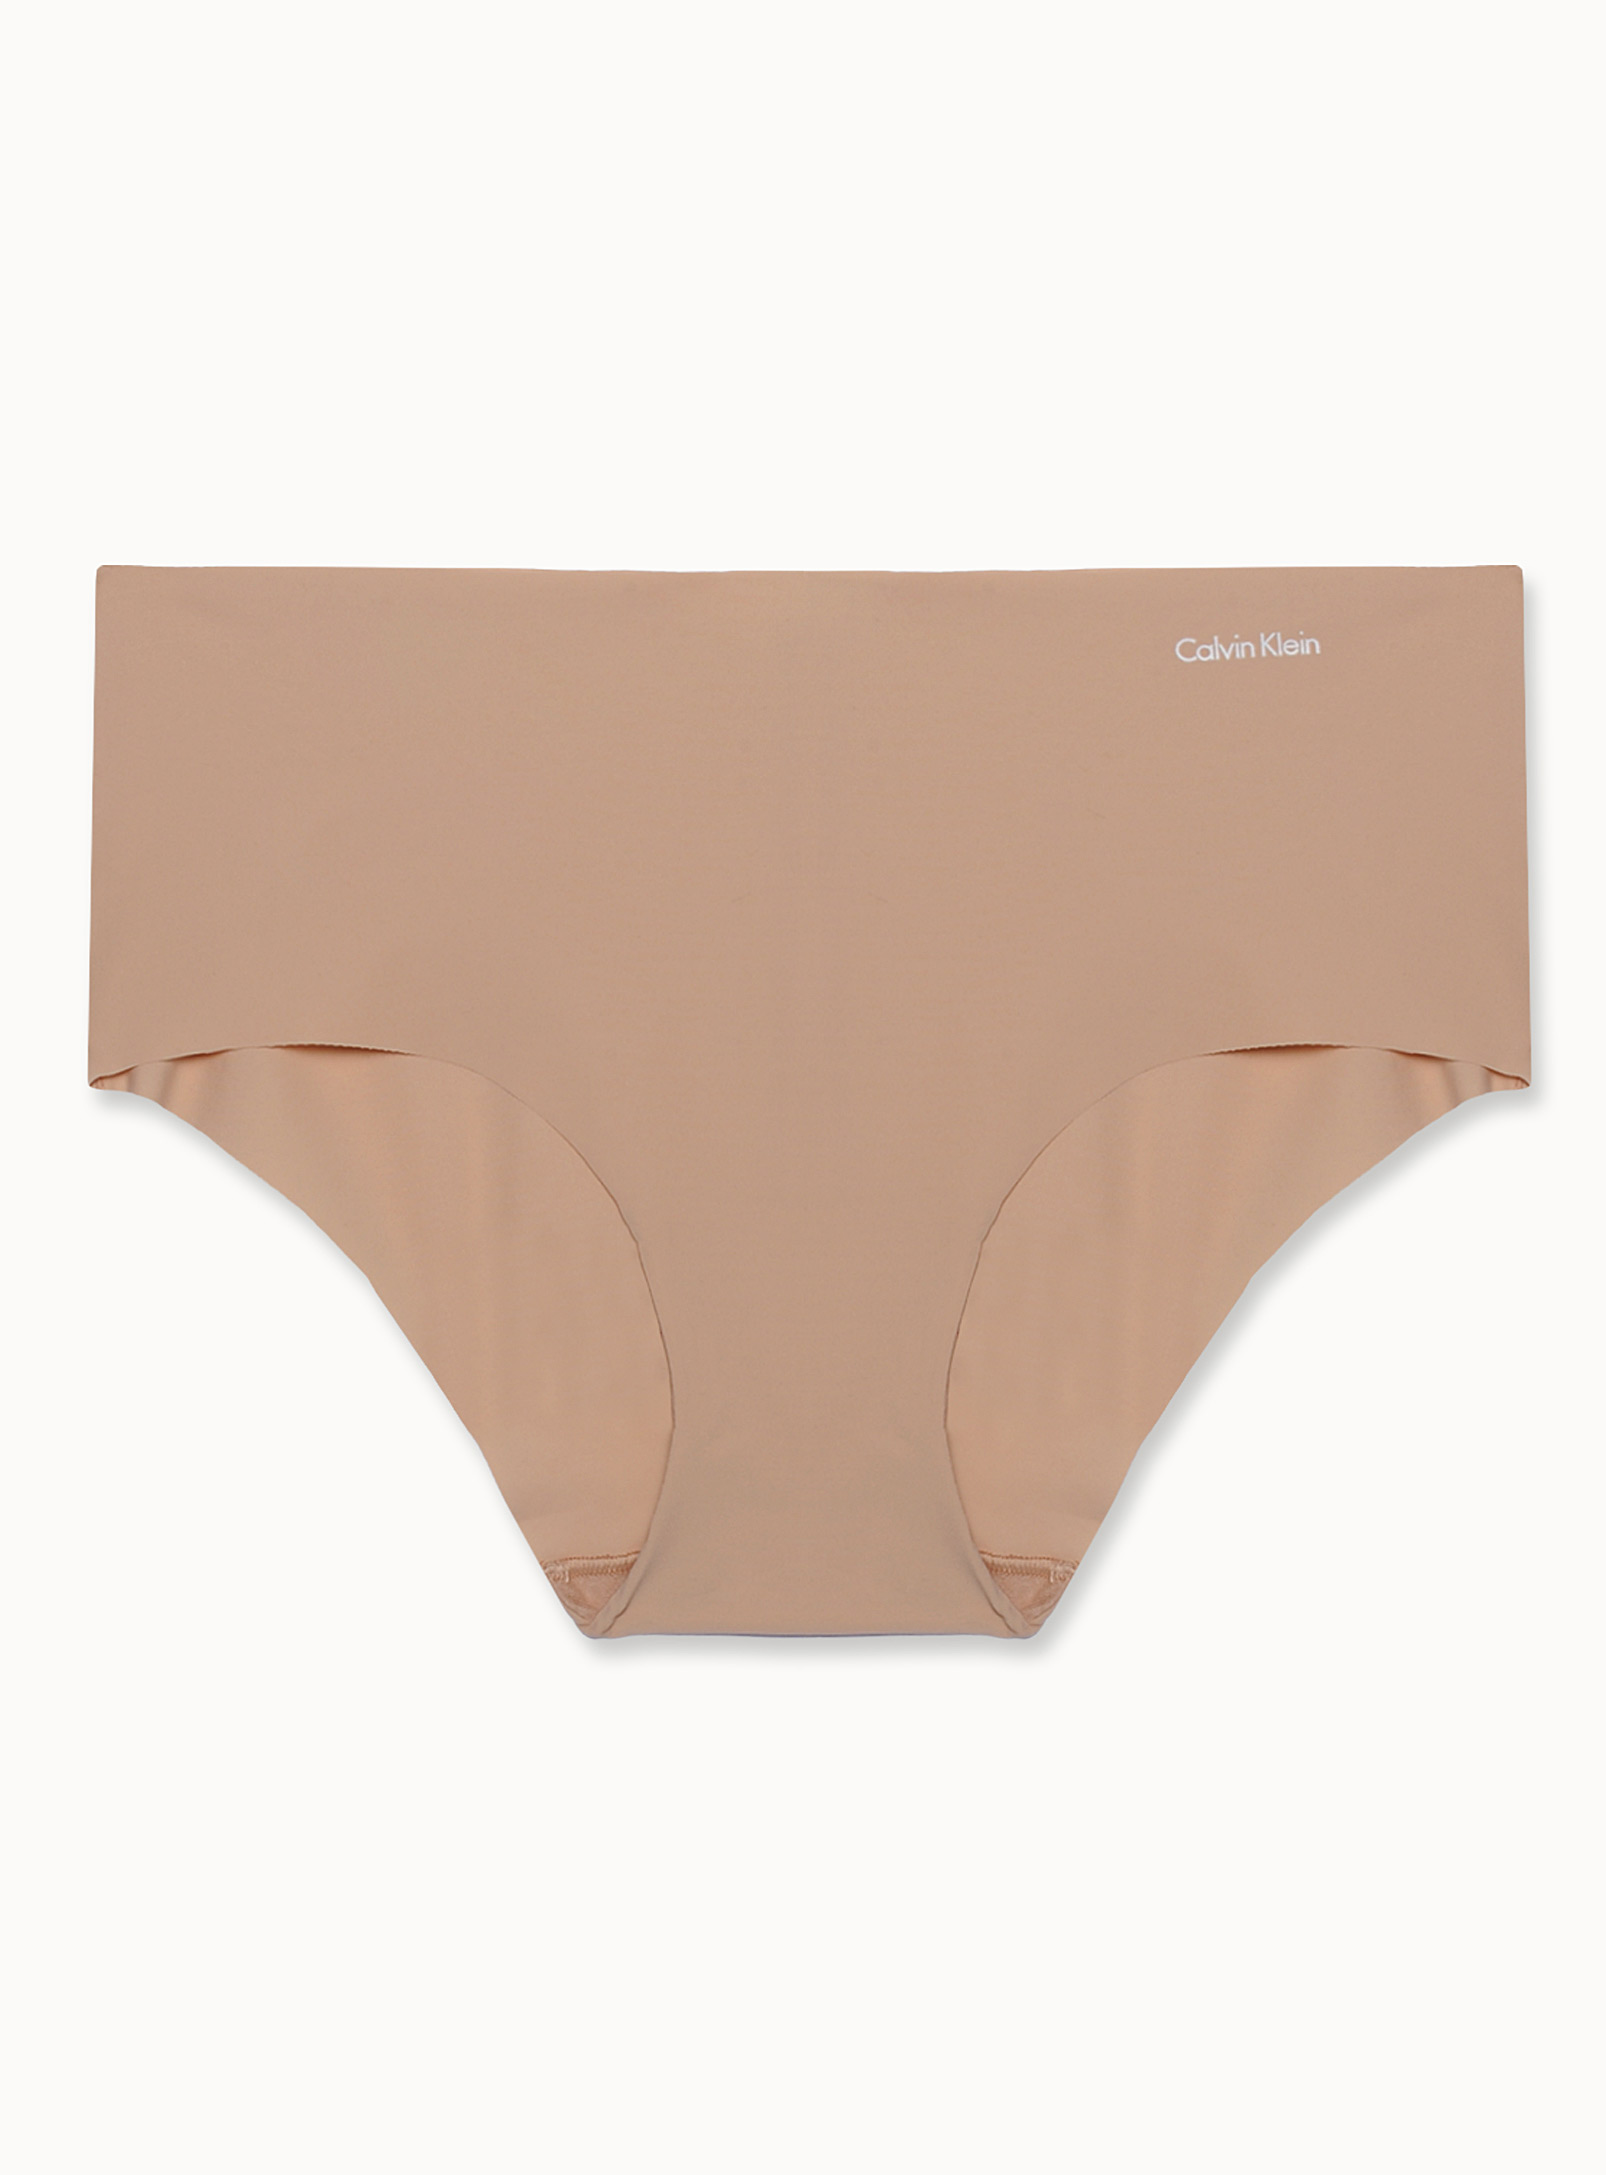 Calvin Klein Invisibles Hipster In Mauve Brown